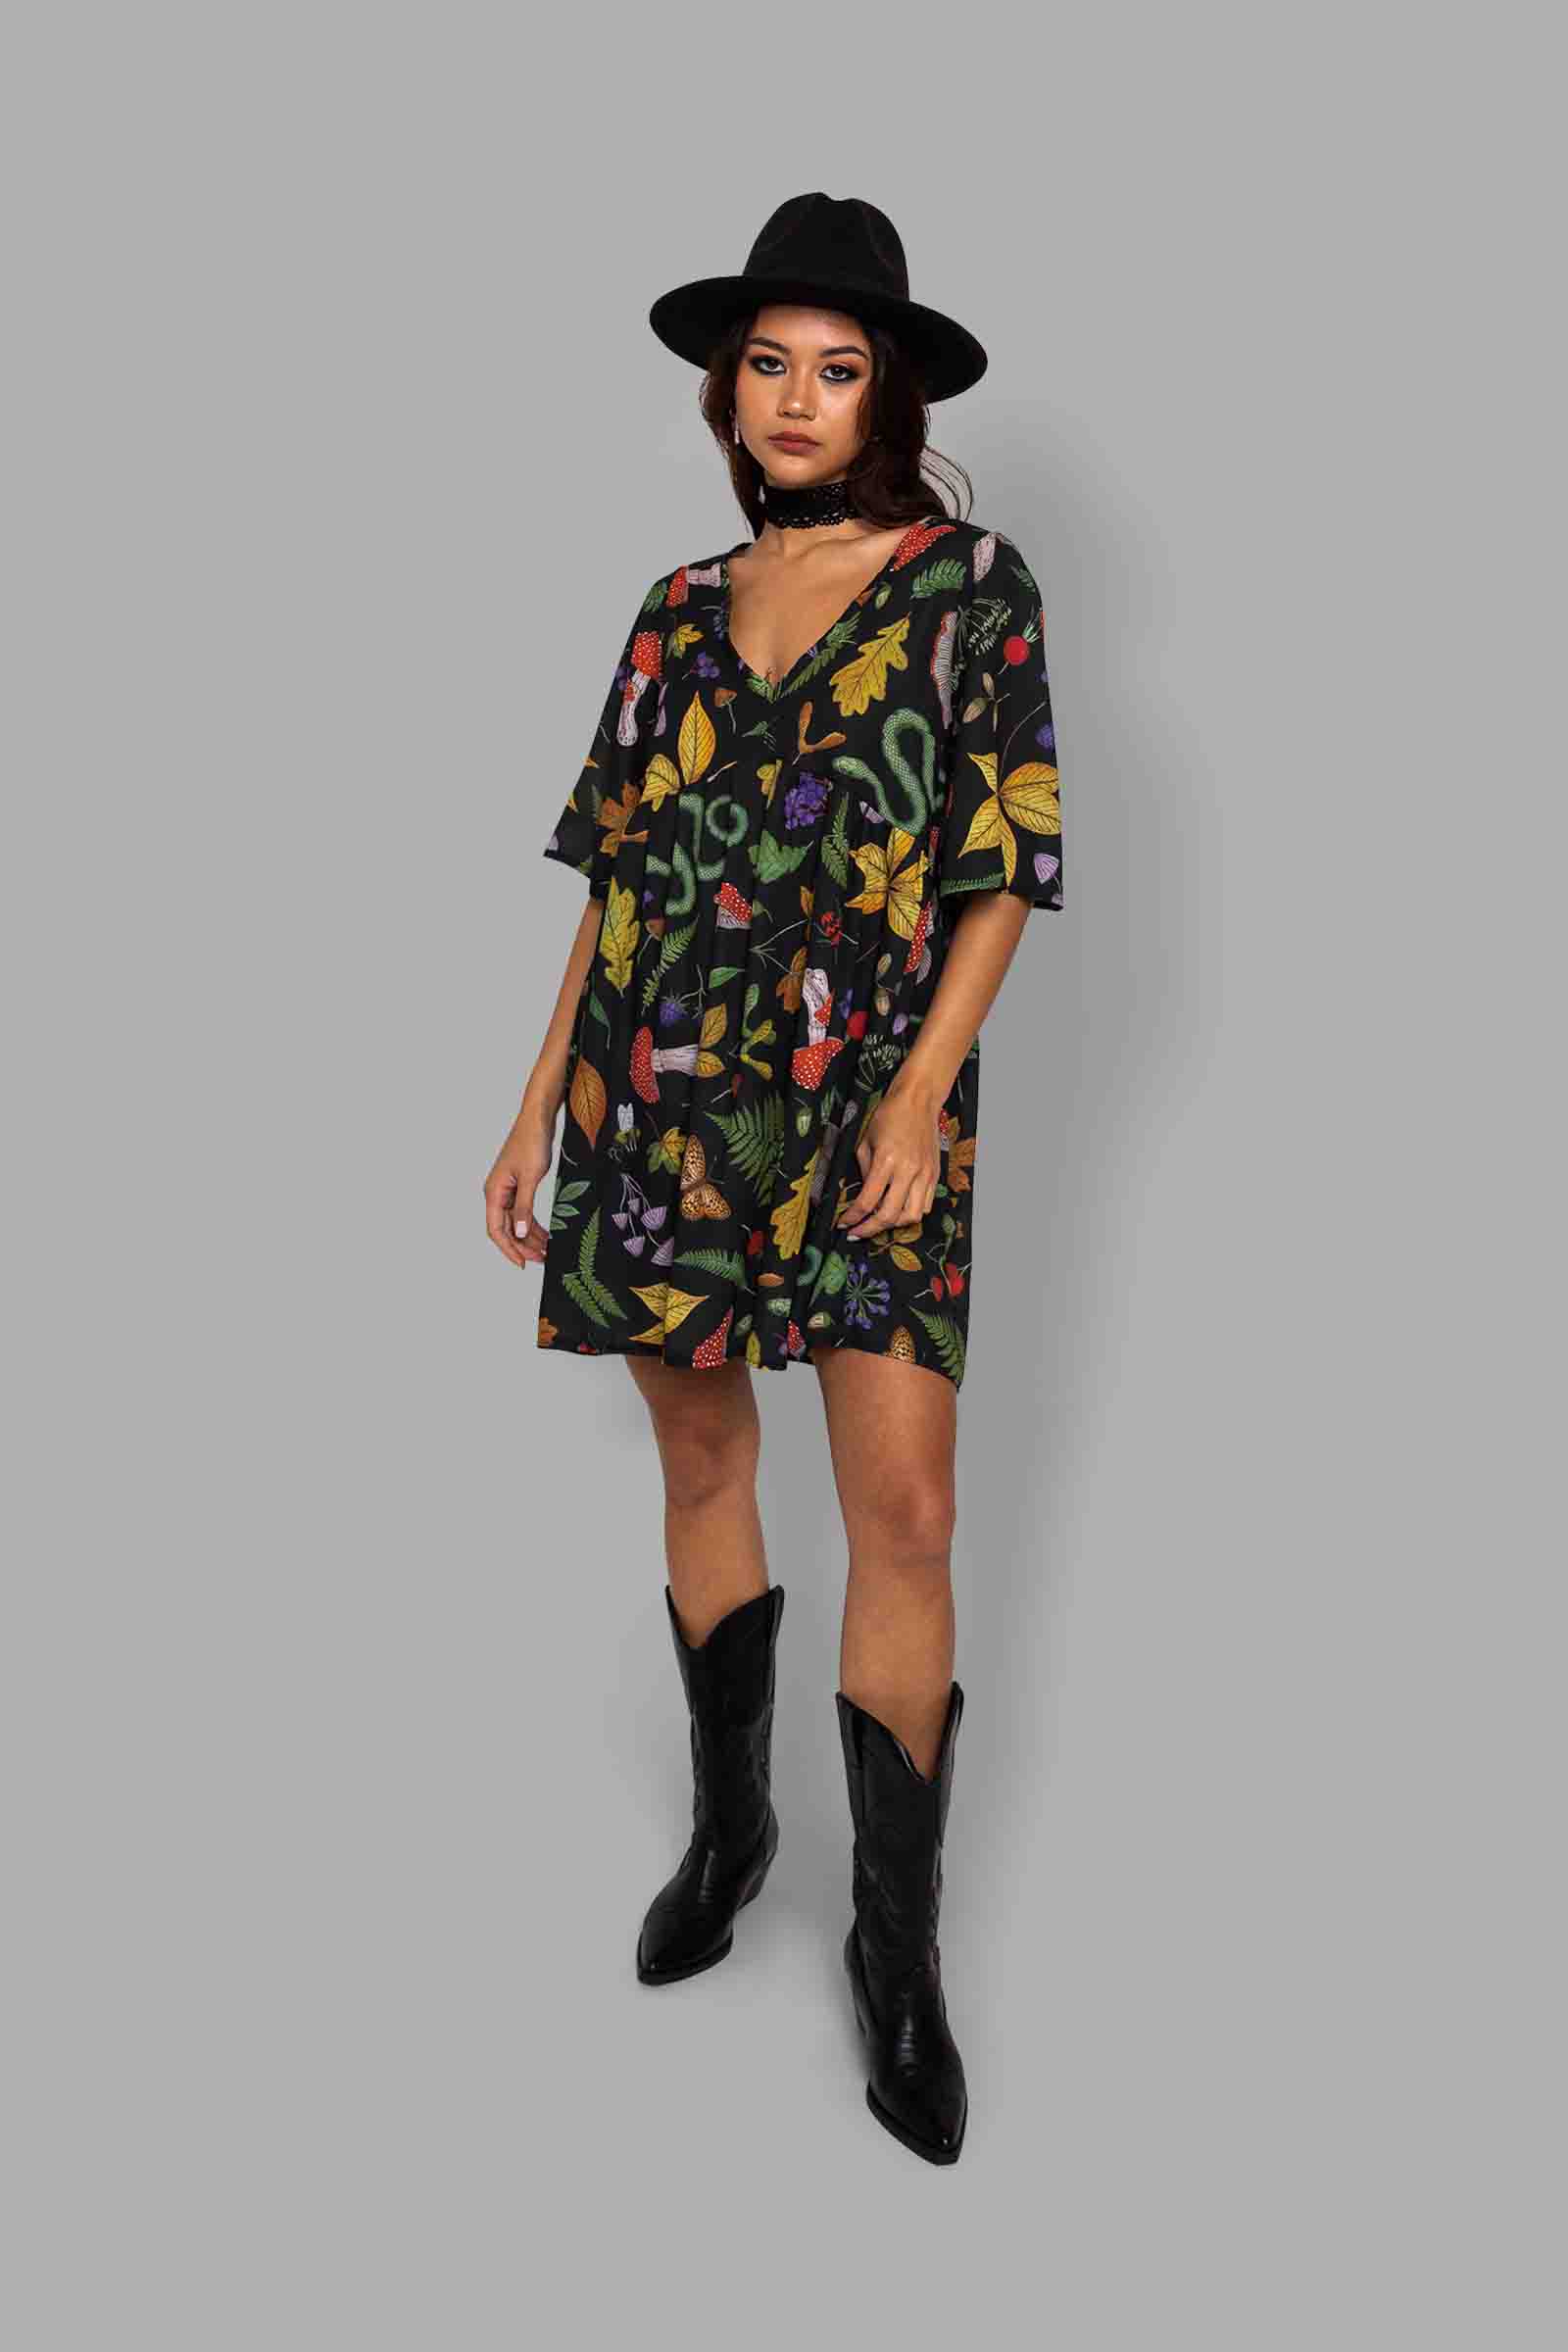 cosmic drifters floaty tunic dress front hedge witch